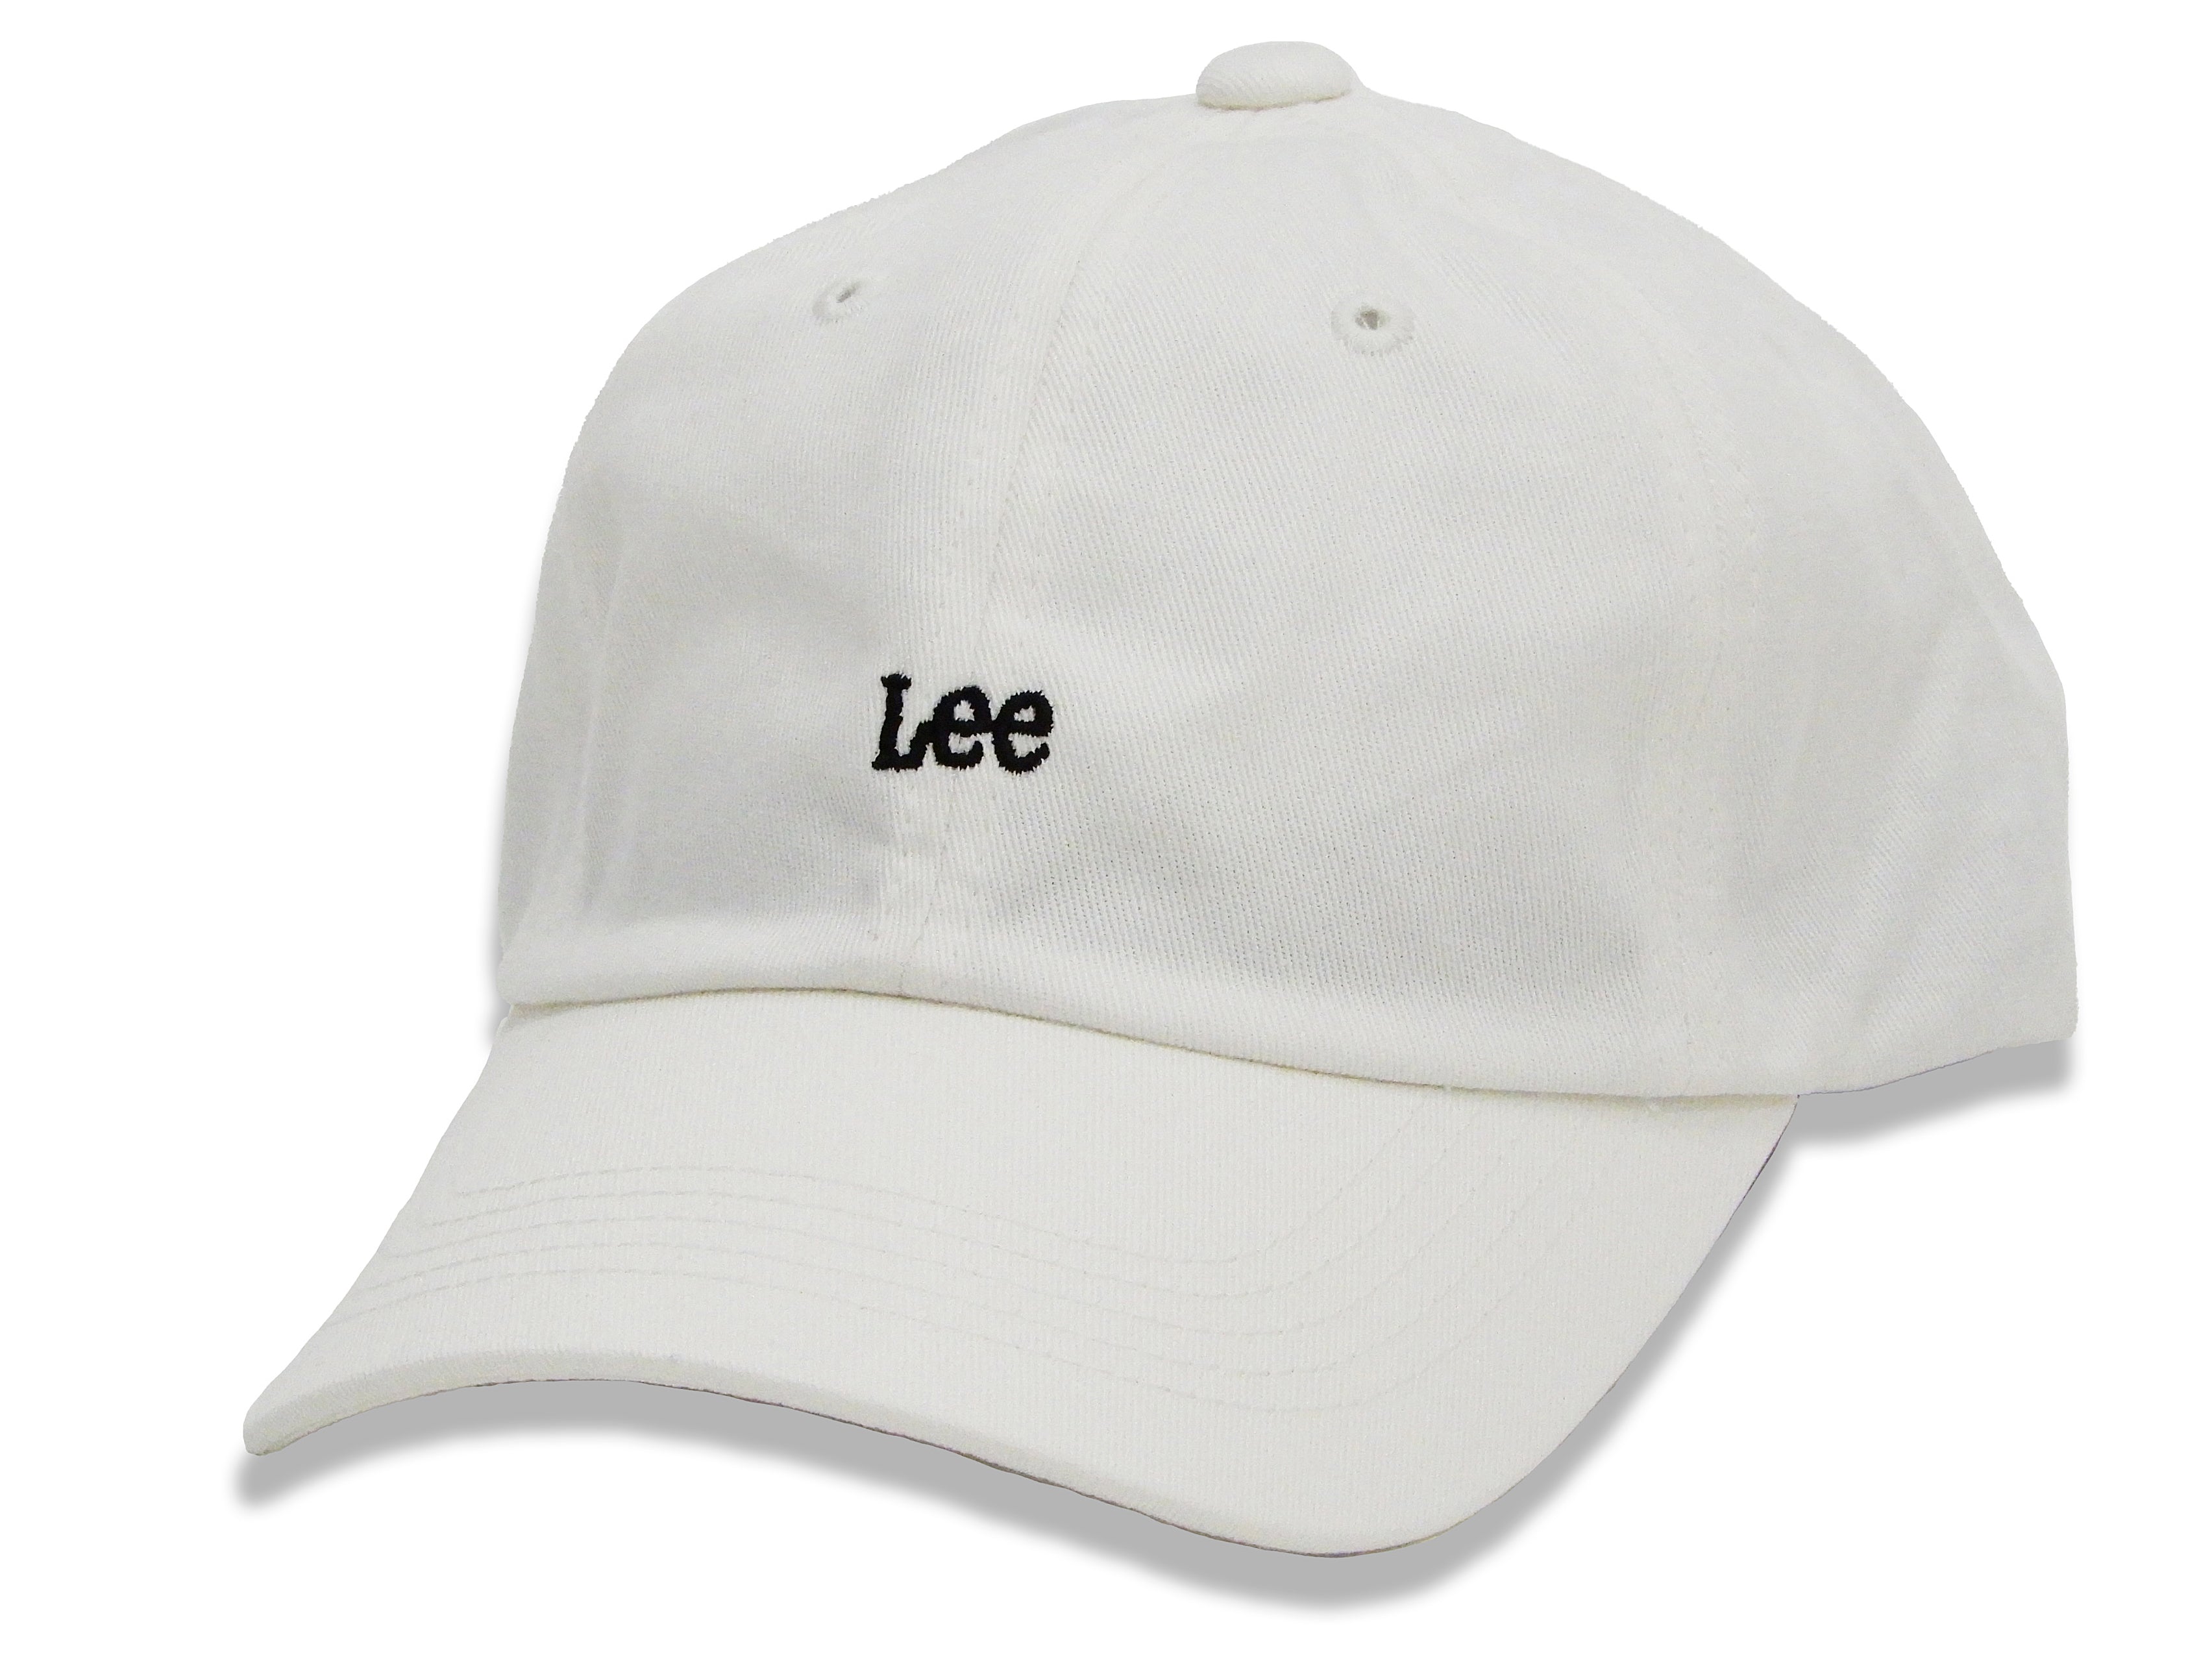 Lee Cap Men's Medium Crown Pre-curved Bill Cotton Twill Hat with